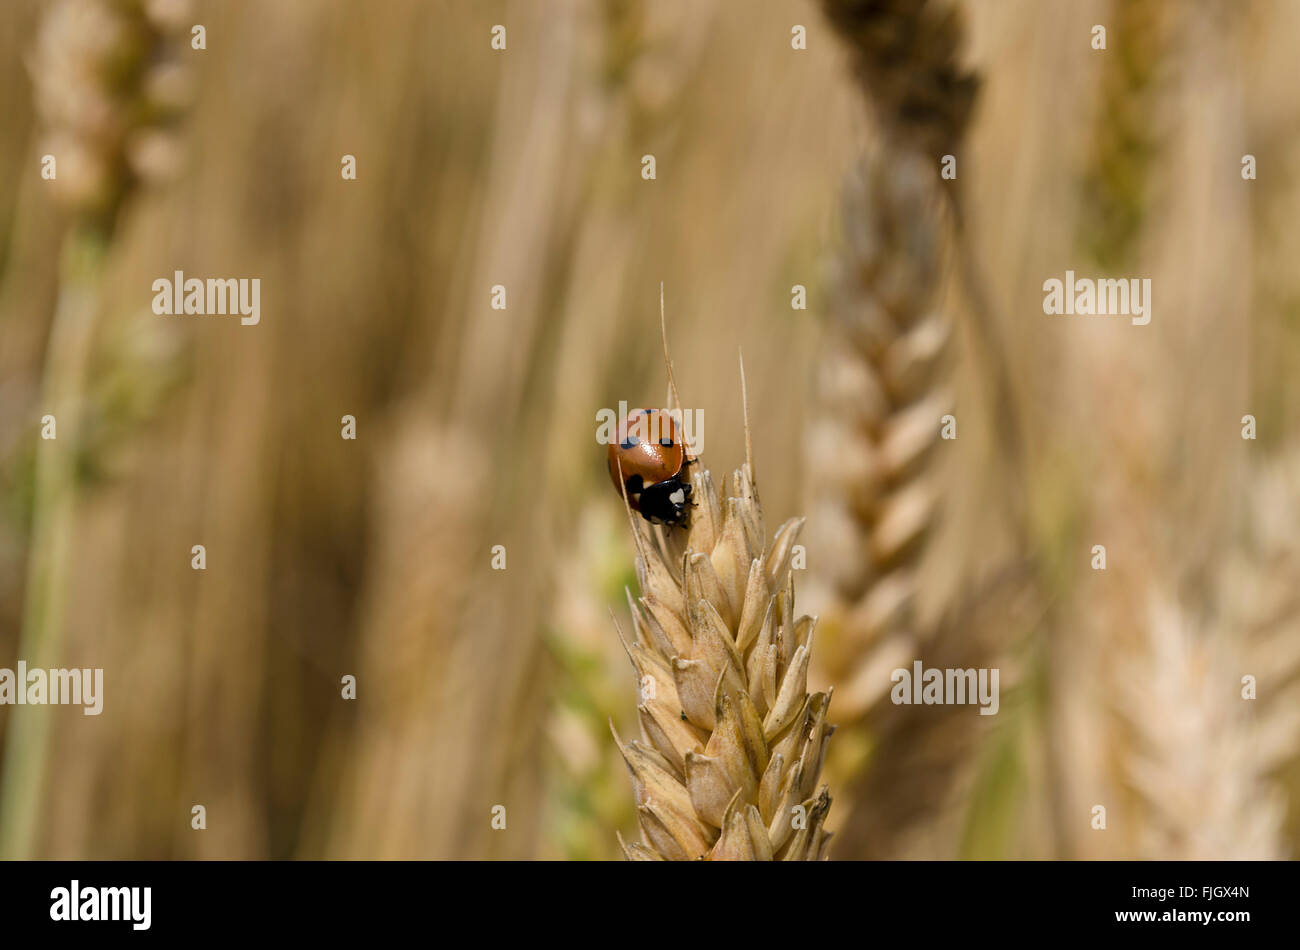 Ladybug on a wheat head in the fields Stock Photo